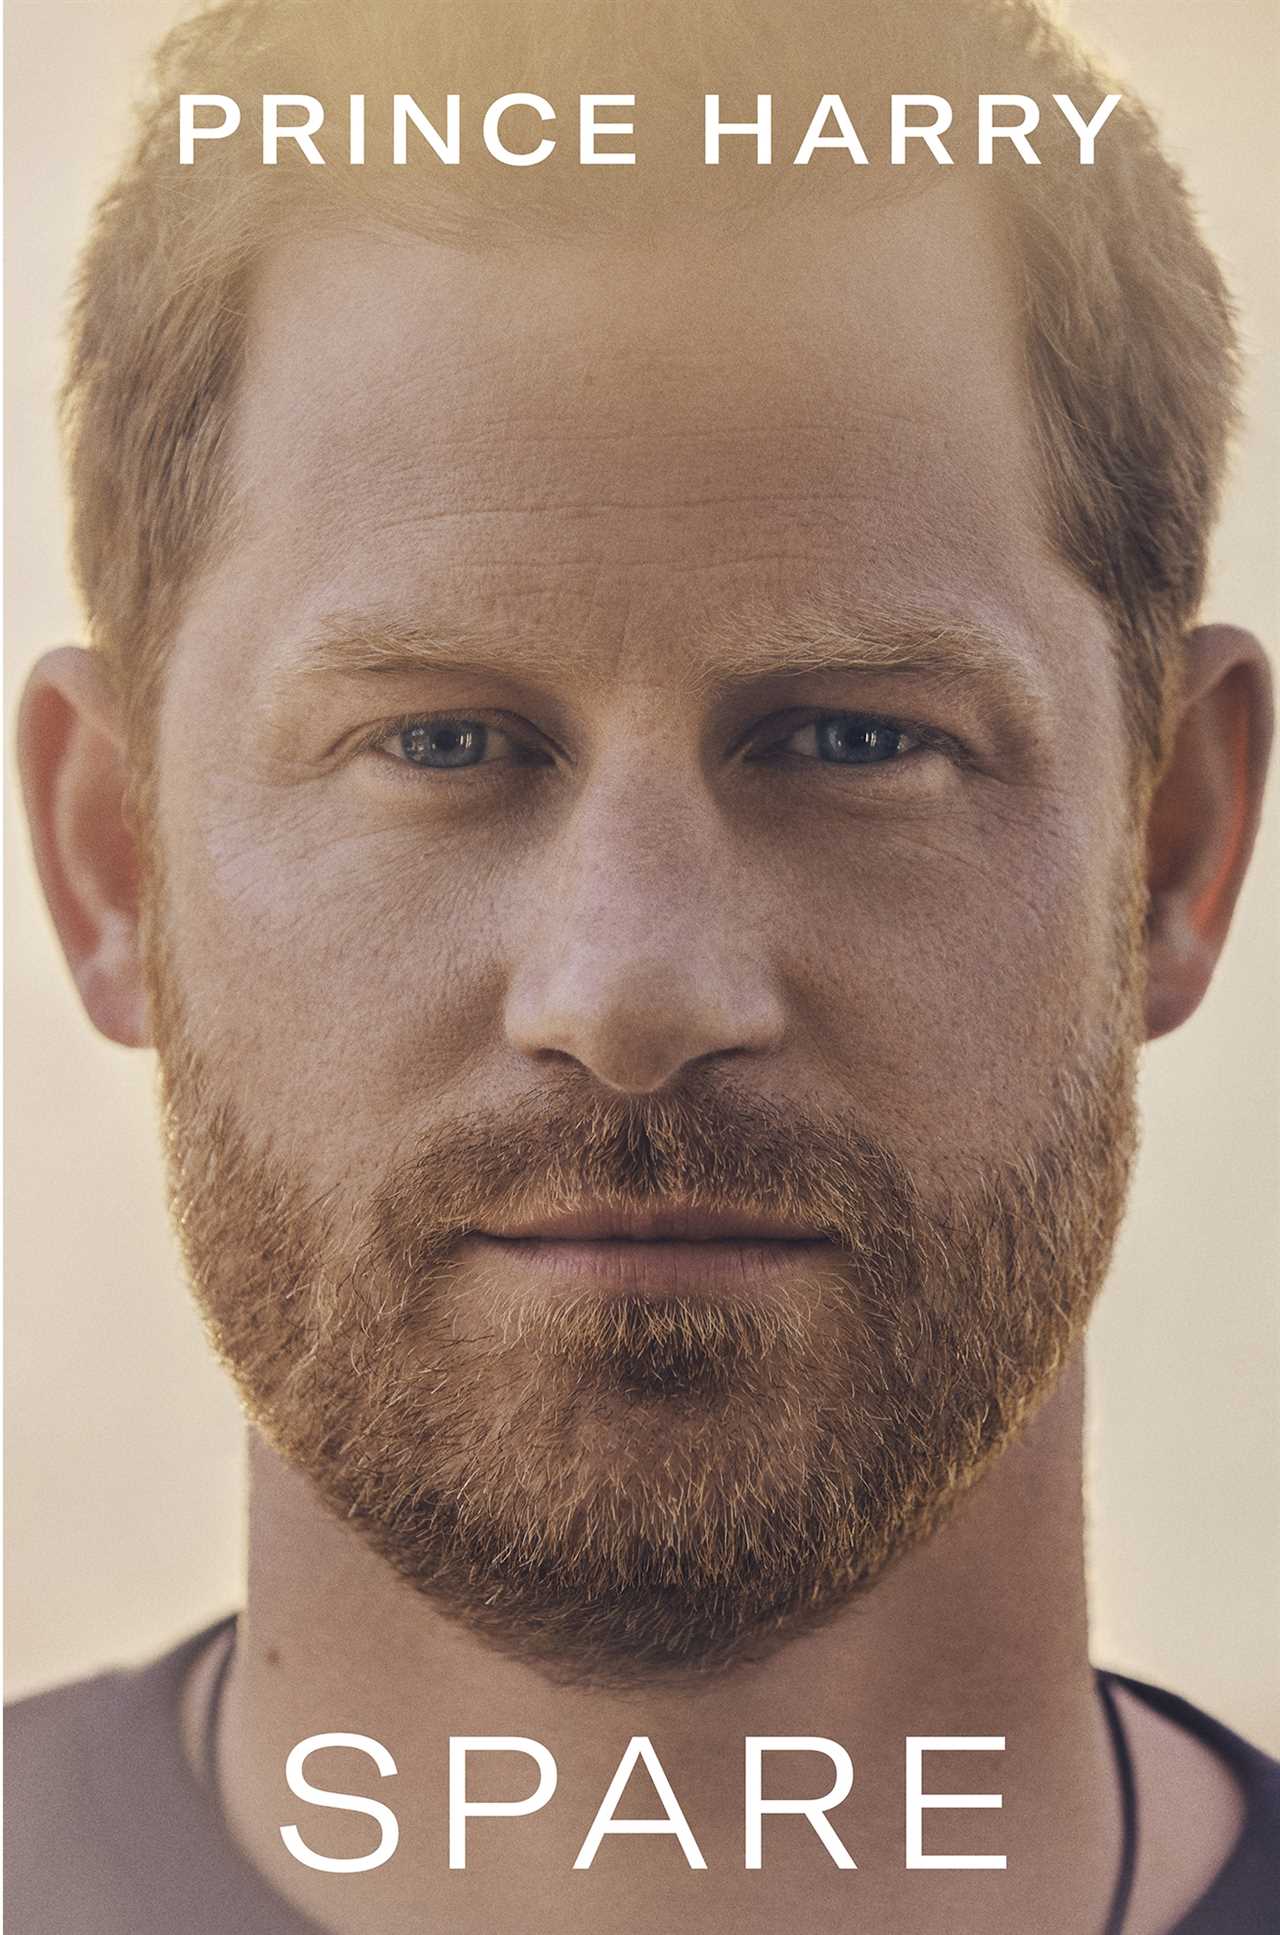 Clue in Prince Harry’s memoir that exposes his ‘deep shame’, according to expert who reveals why book is so ‘nasty’